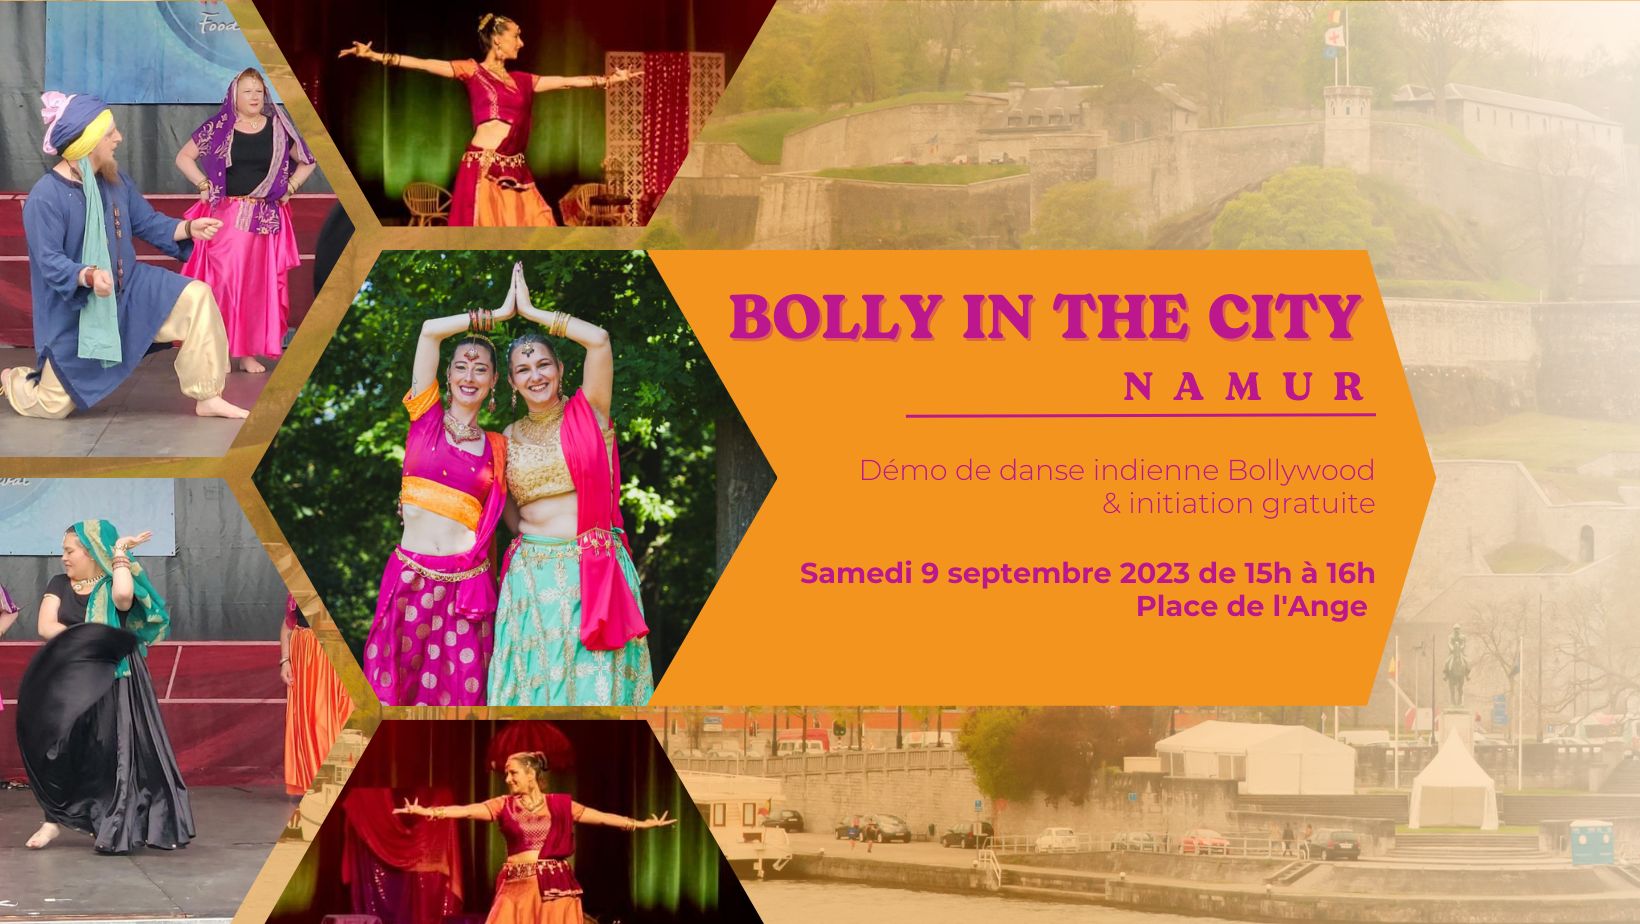 Bolly in the city - site banner.jpg